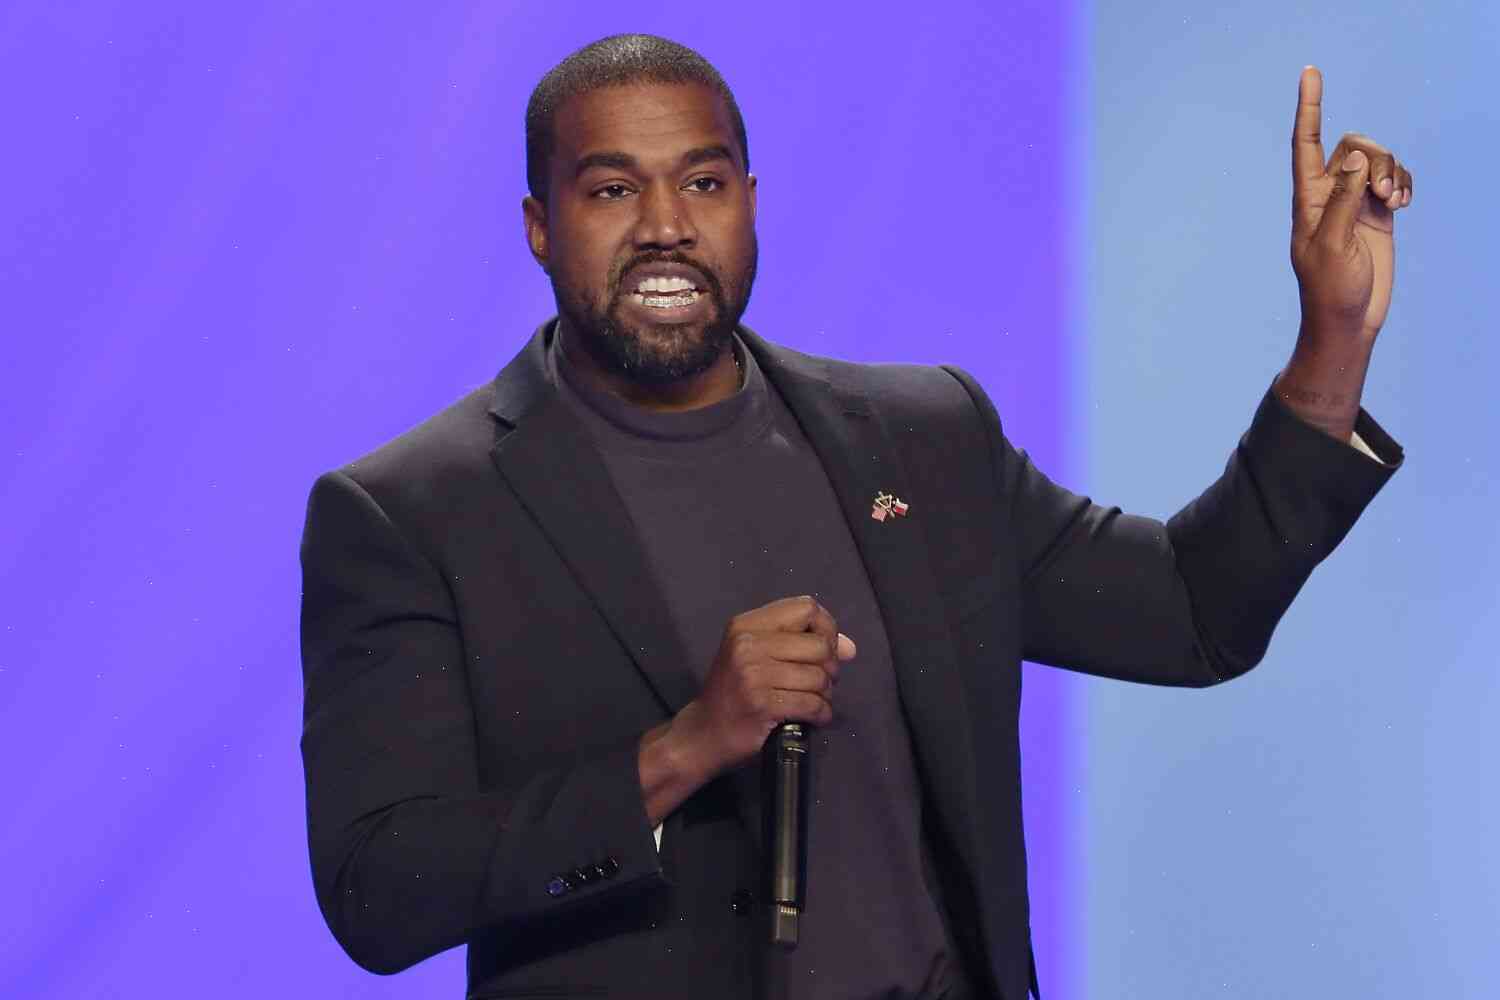 Kanye West’s Performance at the VMAs Was a Bad Decision